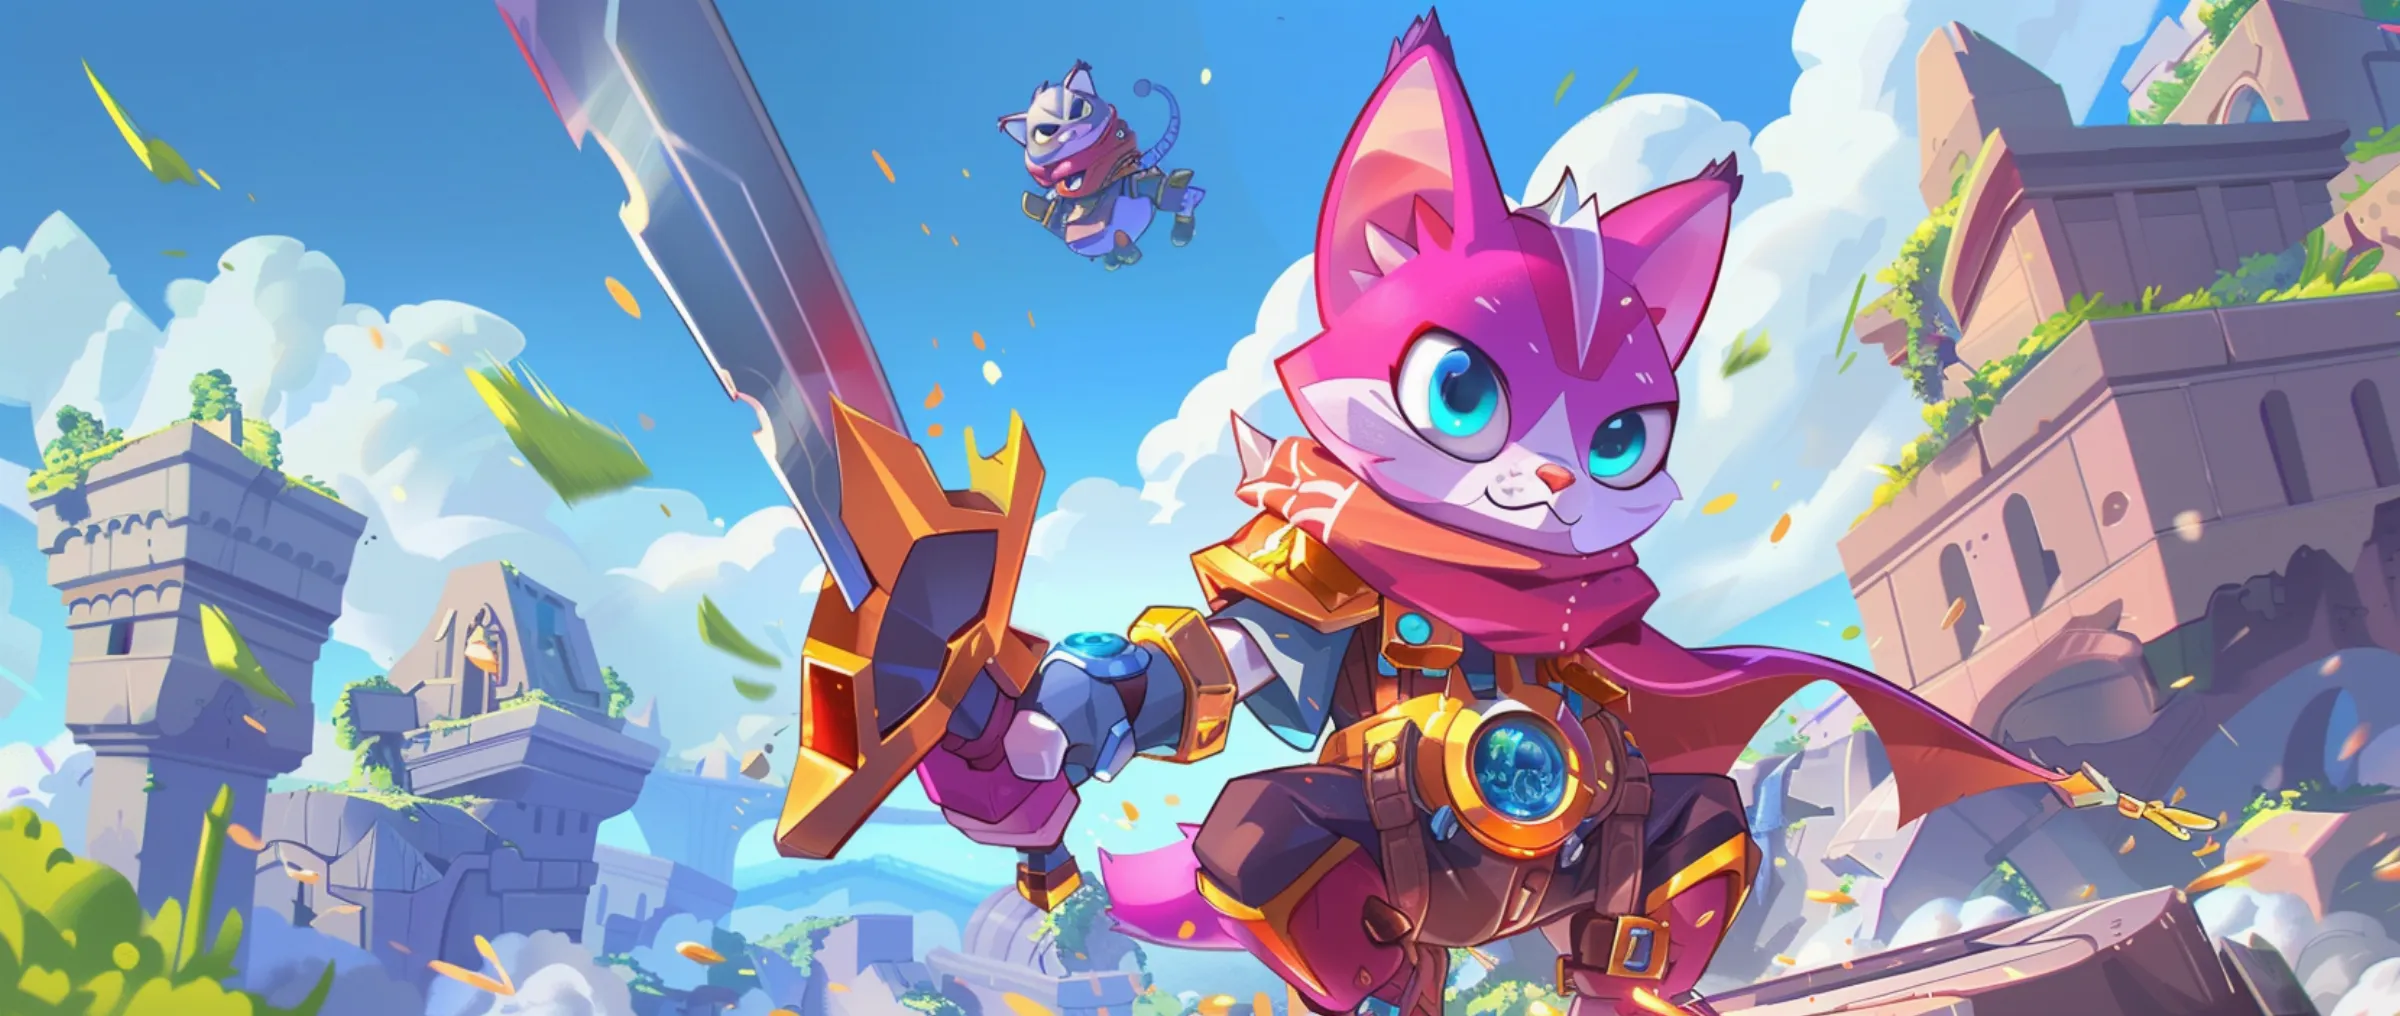 Nyan Heroes presents the pre-alpha version trailer